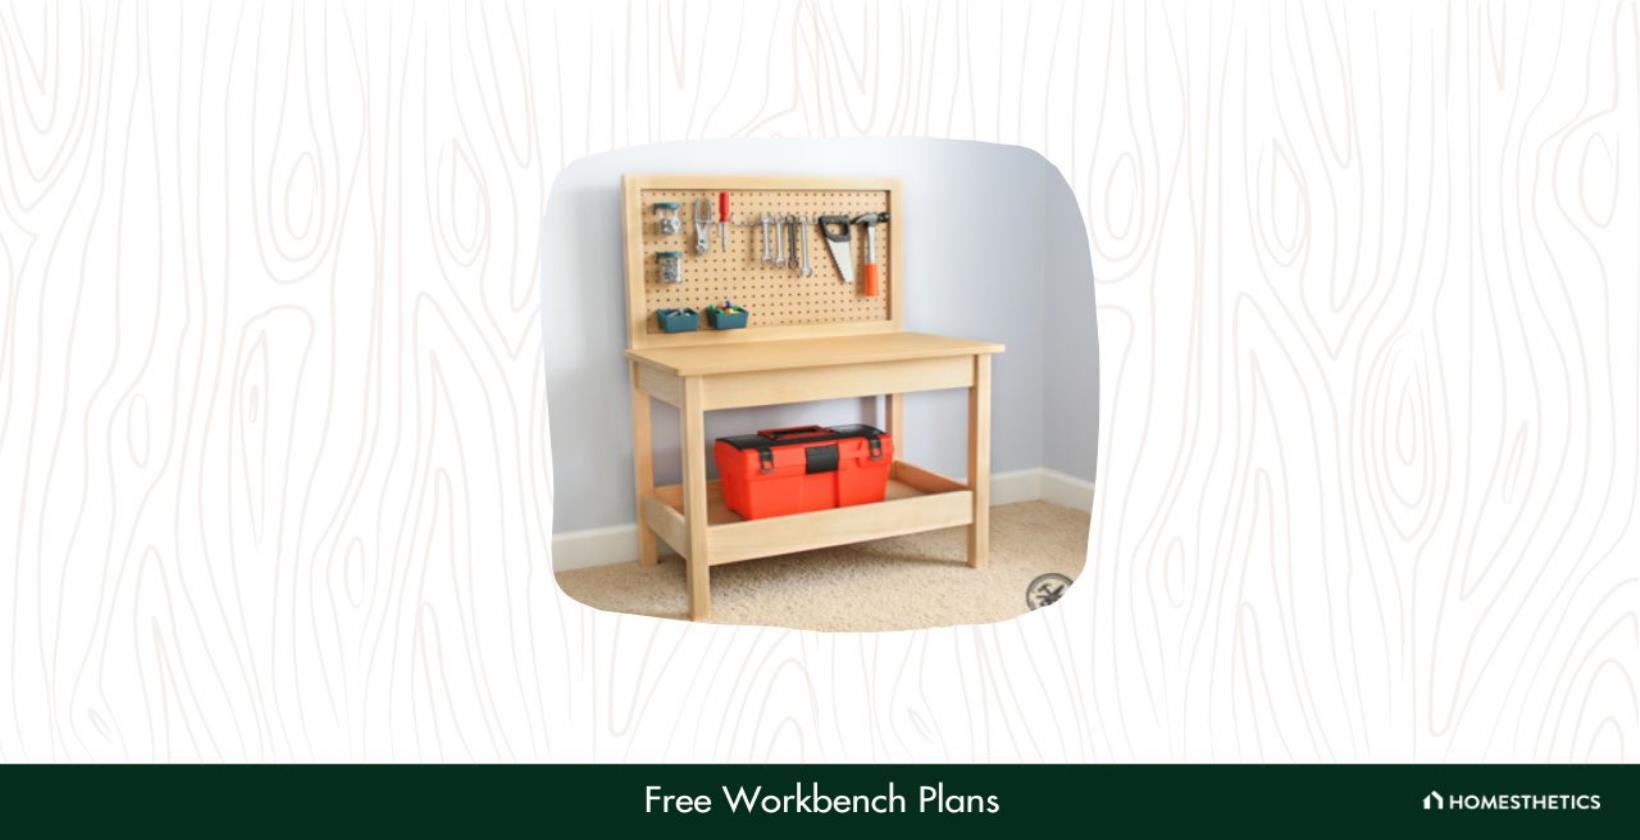 19 Free Workbench Plans for Woodworkers